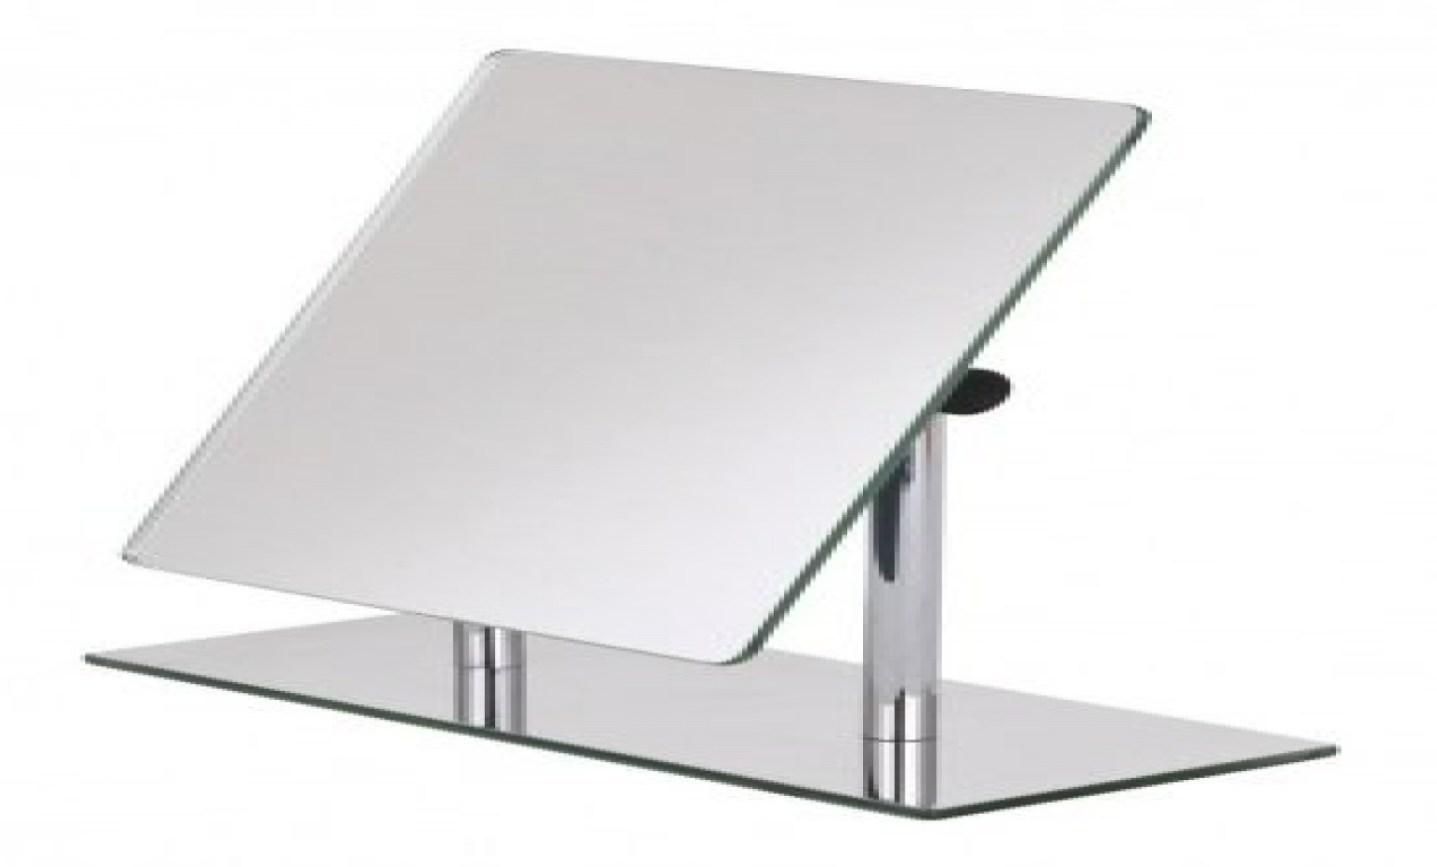 Mirror : Engrossing Pretty Noticeable Large Chrome Free Standing Throughout Free Standing Bathroom Mirrors (View 6 of 20)